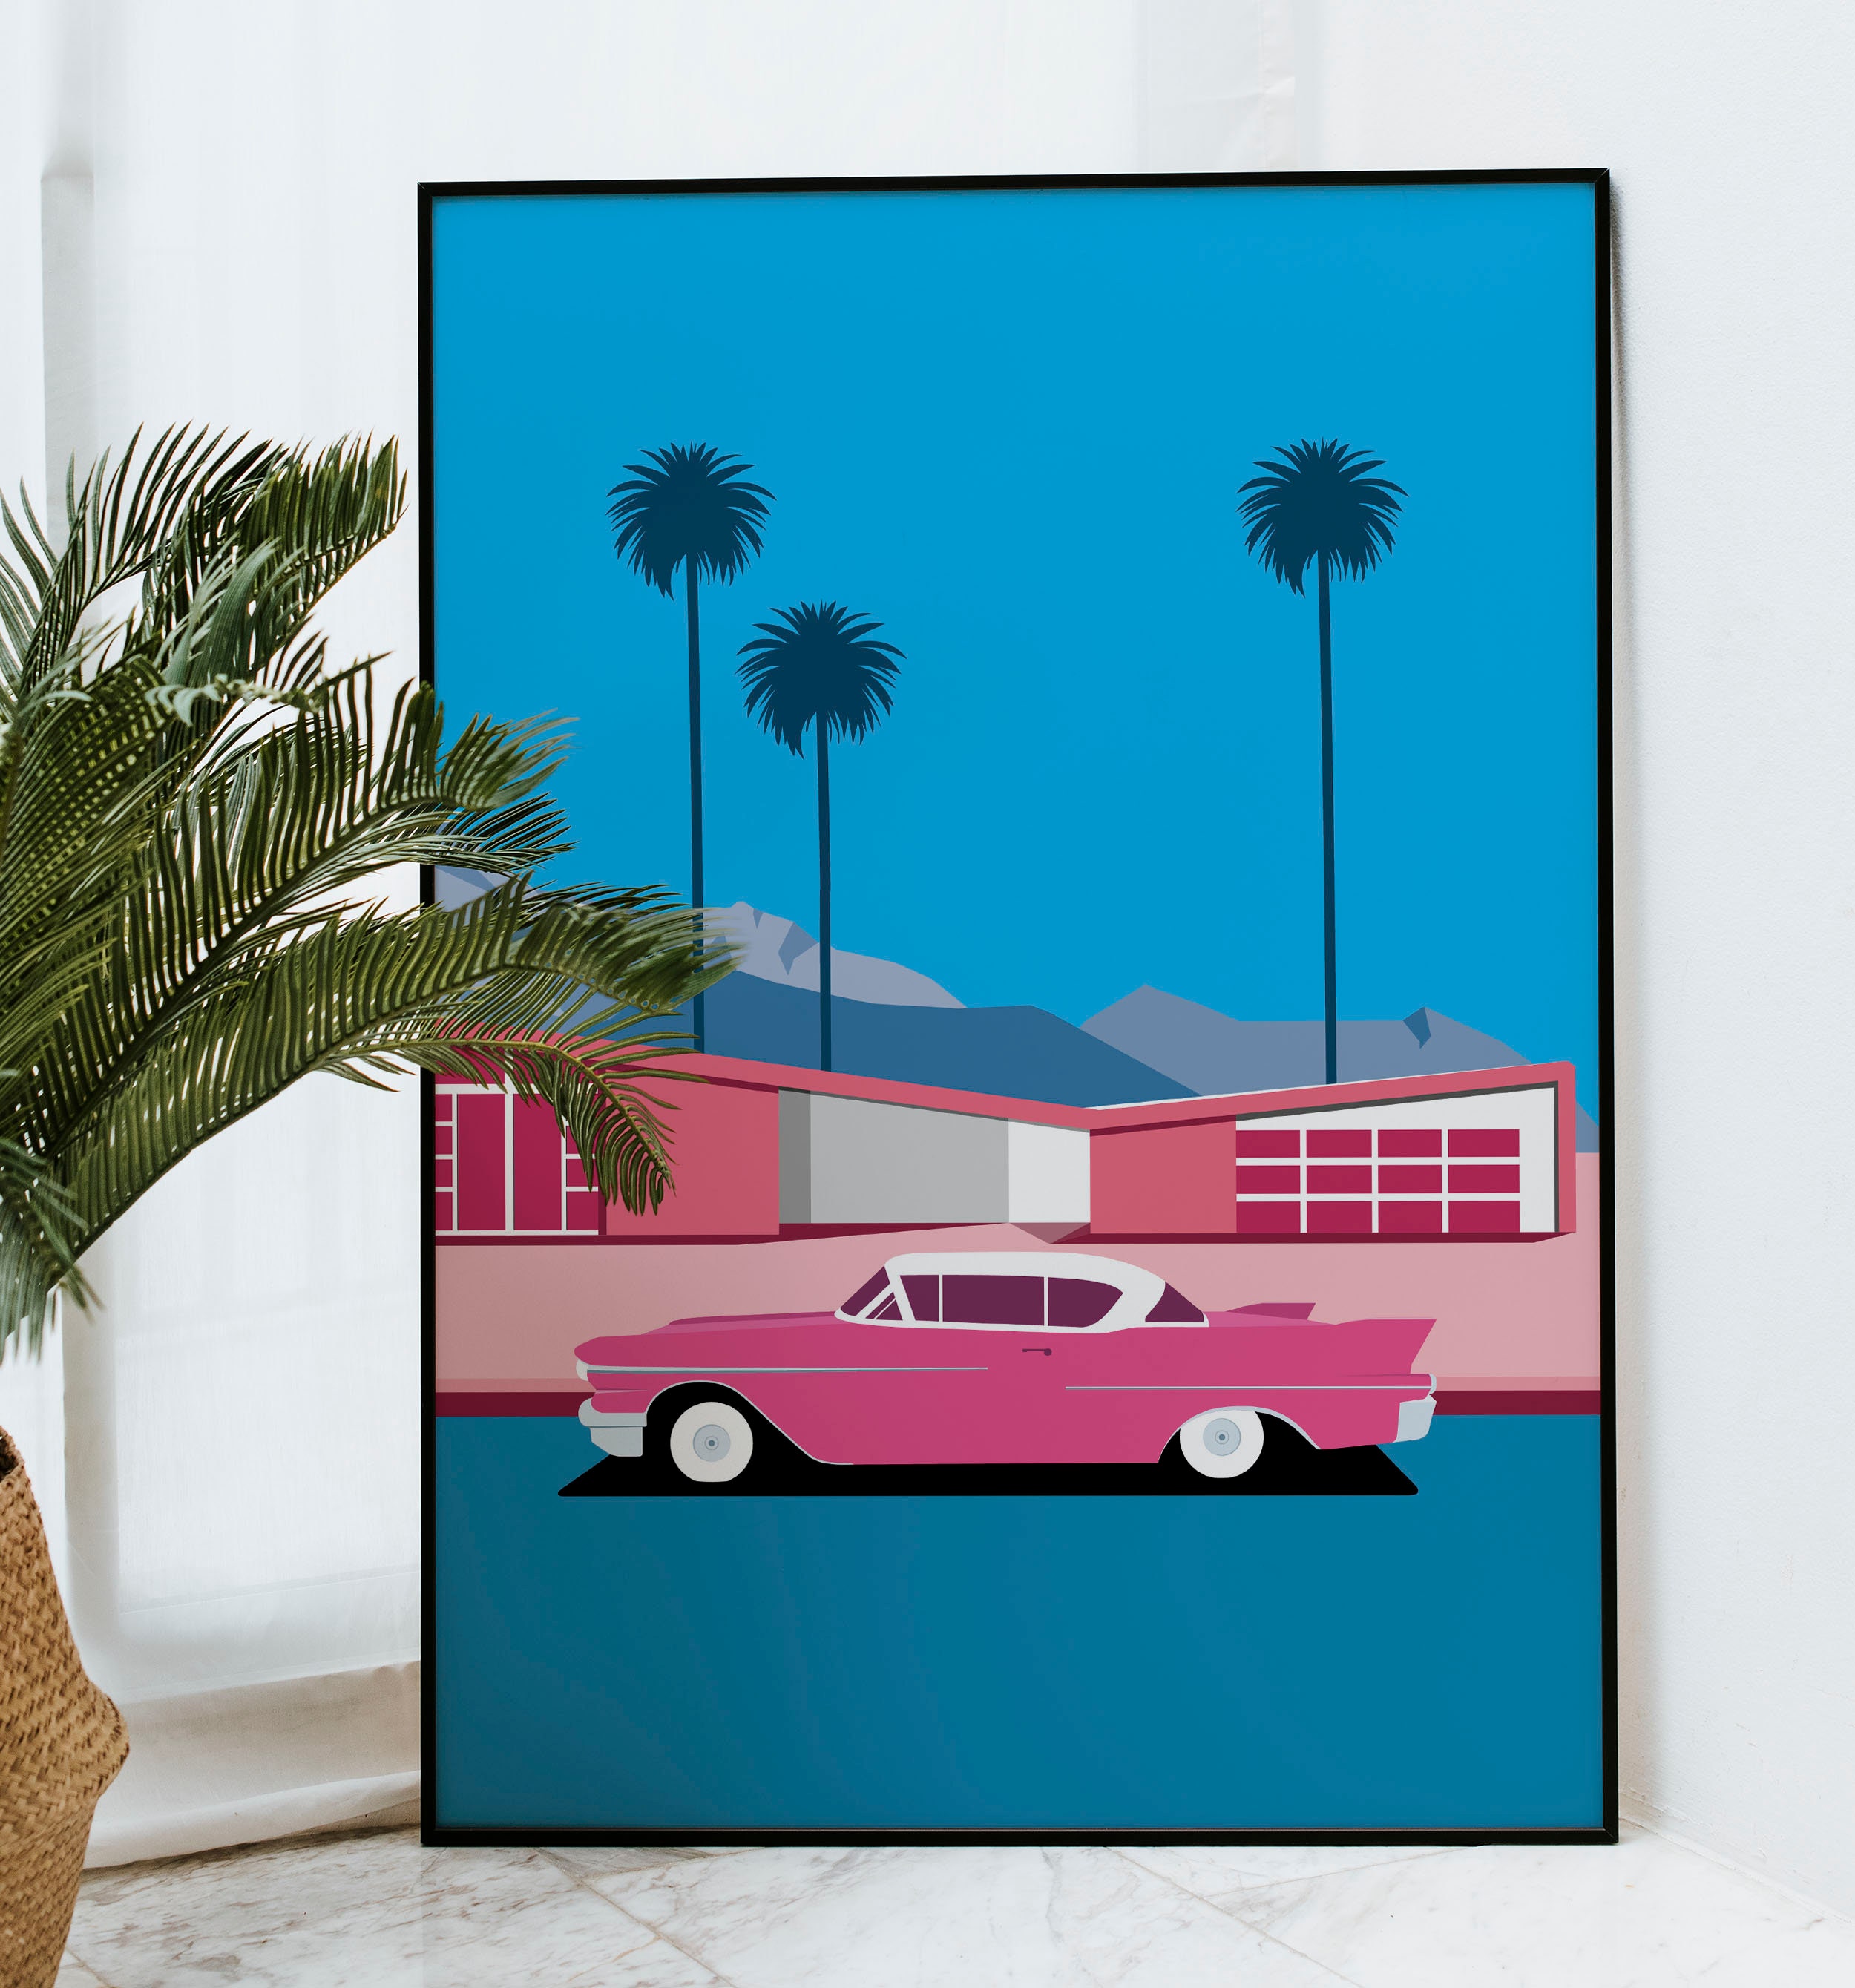 PALM SPRINGS Saguaro Hotel Picture Poster Print Sizes A5 to A0 **FREE DELIVERY